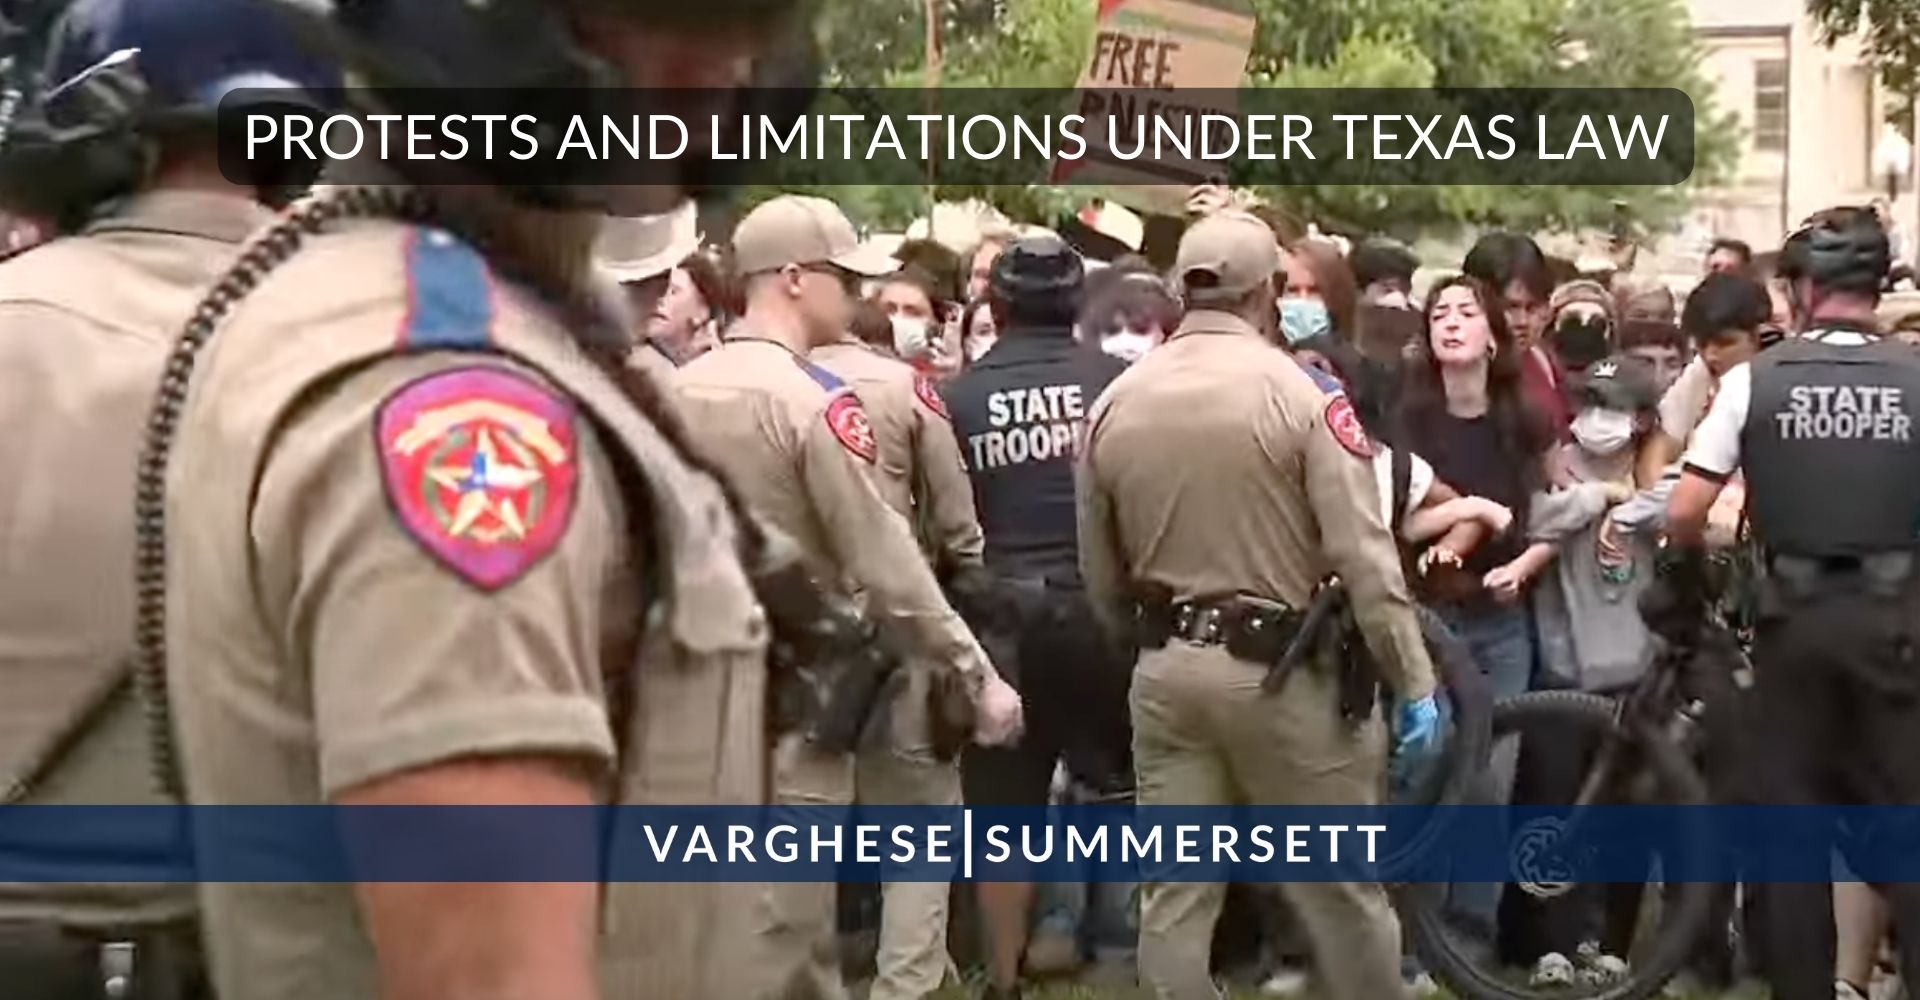 University of Texas Arrests: Protests in Texas and Limitations on Free Speech